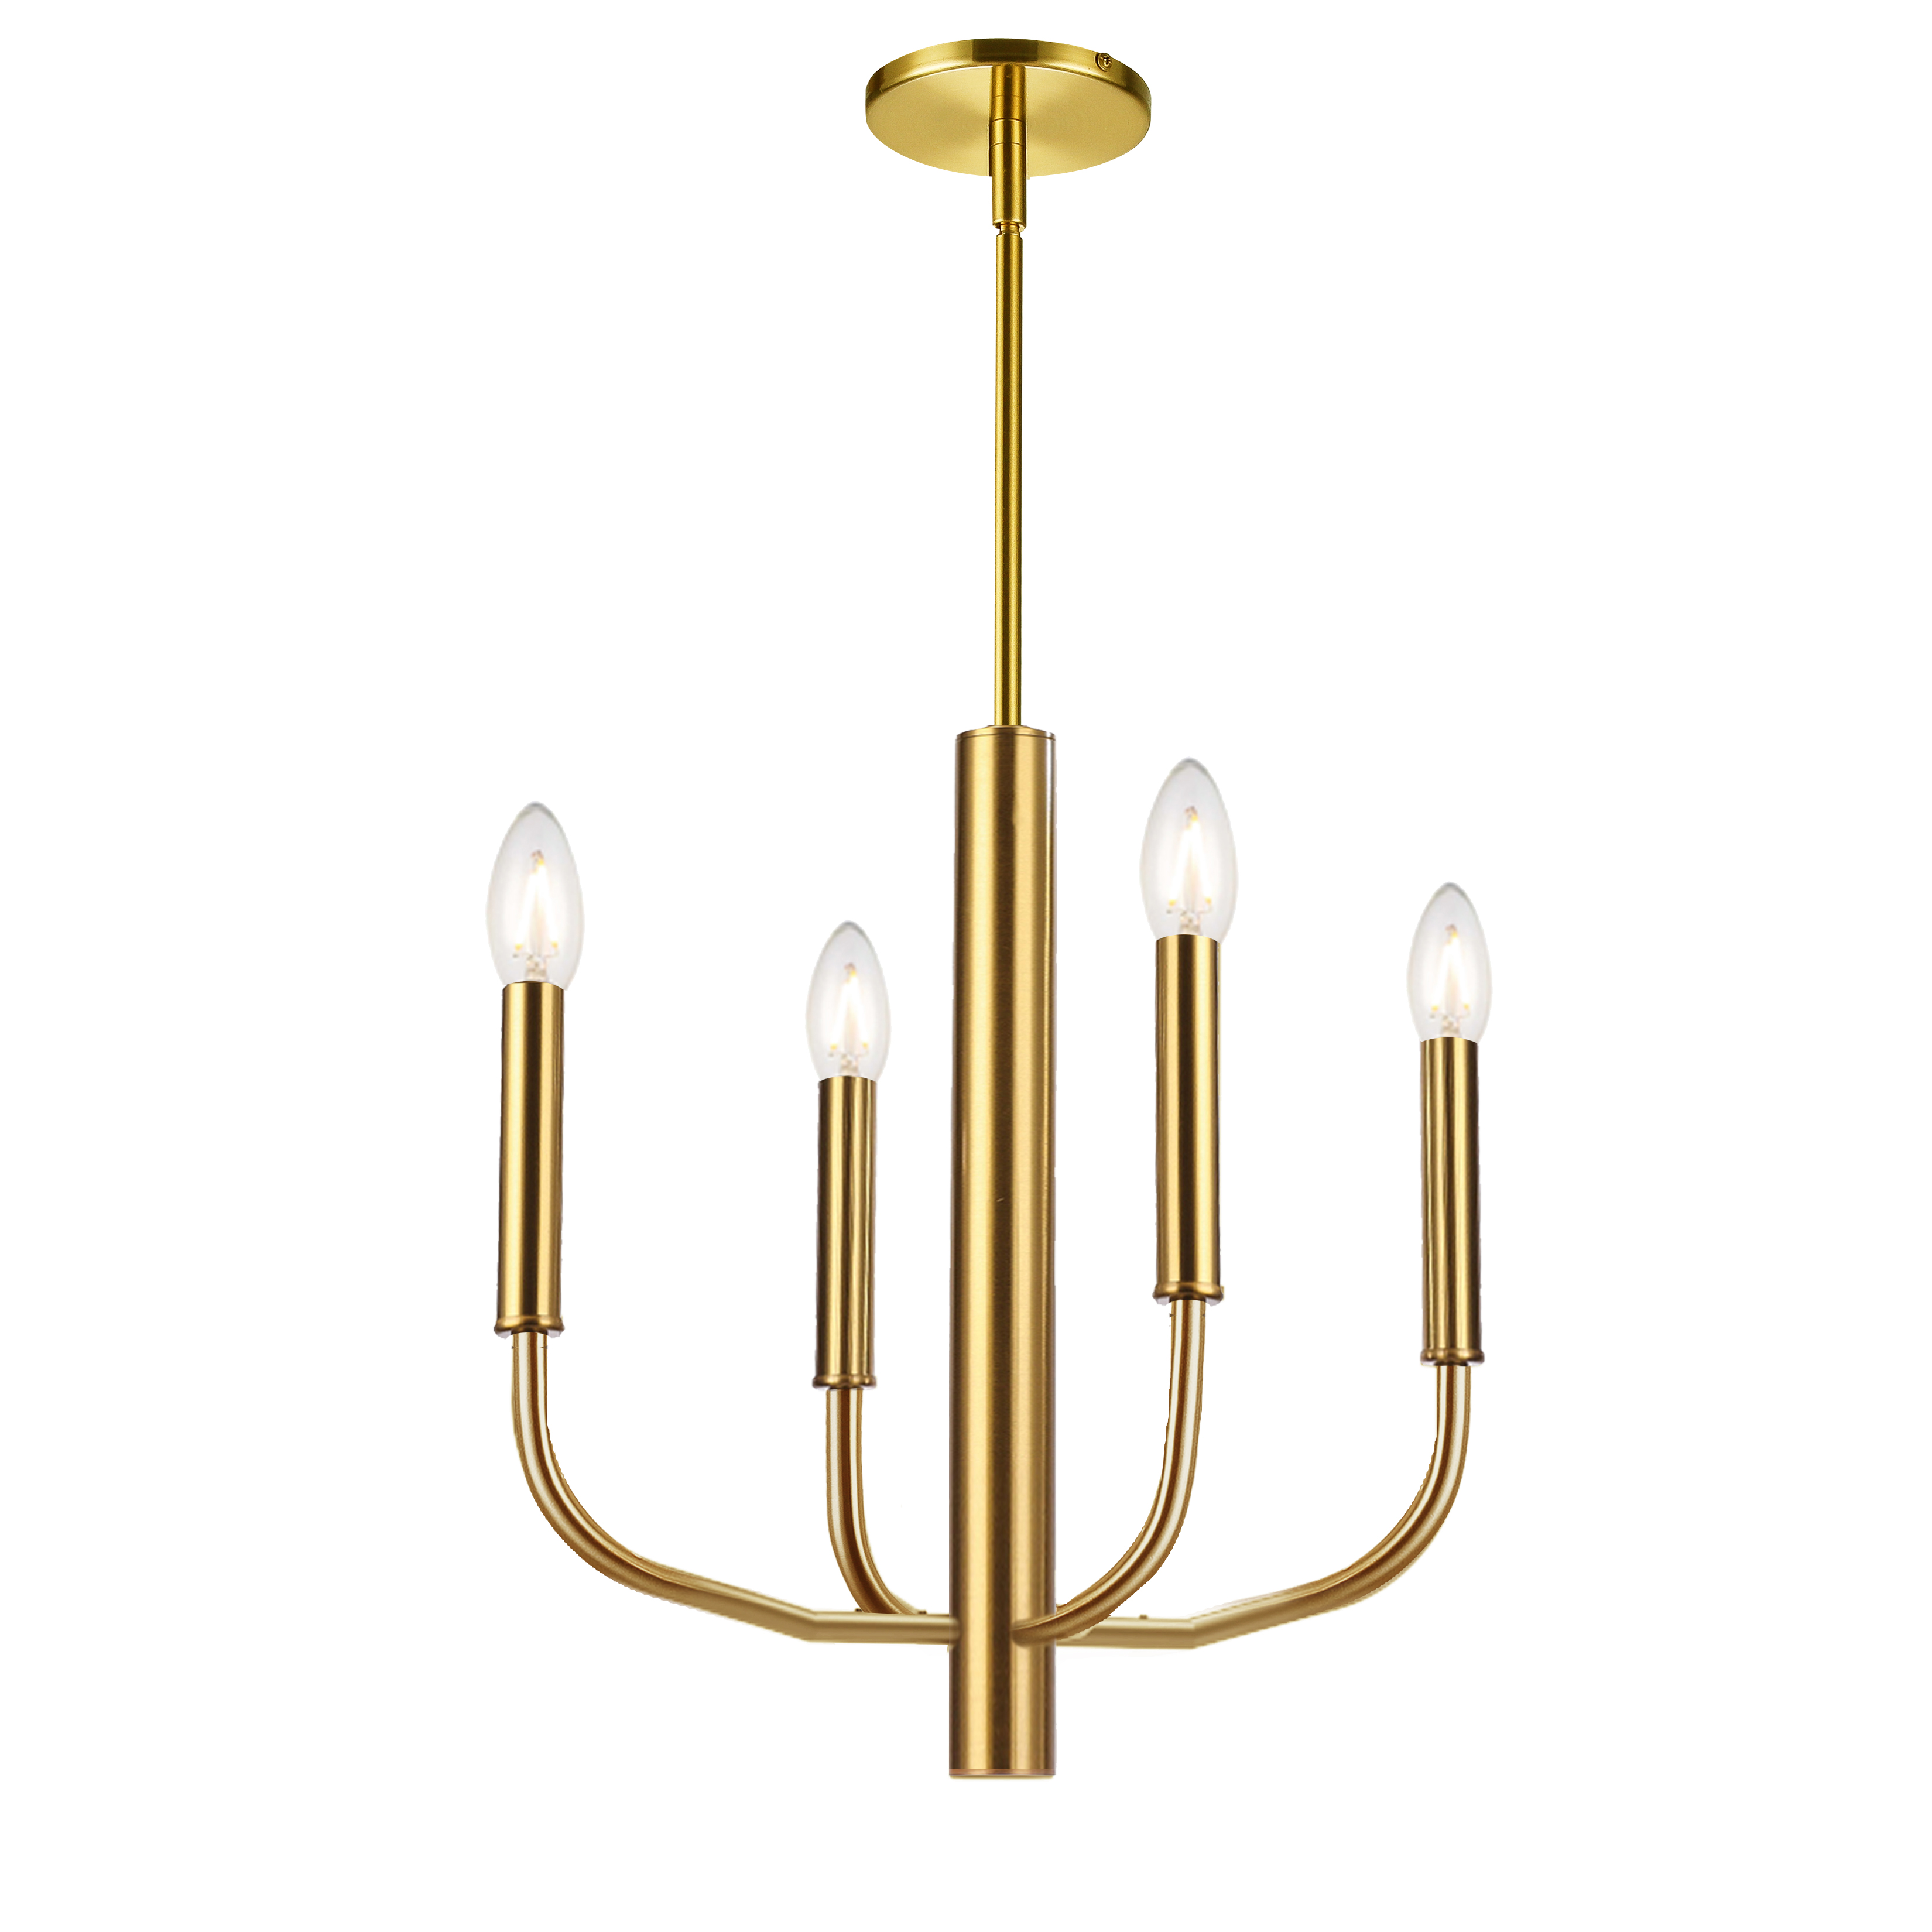 Using a simple idea based on traditional chandelier designs, the Eleanor family of lighting exudes luxury and refined style. It's available in configurations to suit larger or smaller spaces.  The metal frame in a choice of finish features a strong vertical drop, with arms that curve gracefully upwards in one or two tiers. An optional fabric shade encompasses the silhouette while diffusing the light to a softer glow.  Elegant and striking in its effect, Eleanor lighting will enhance the main rooms of your home, including living and dining rooms, or a main foyer area.